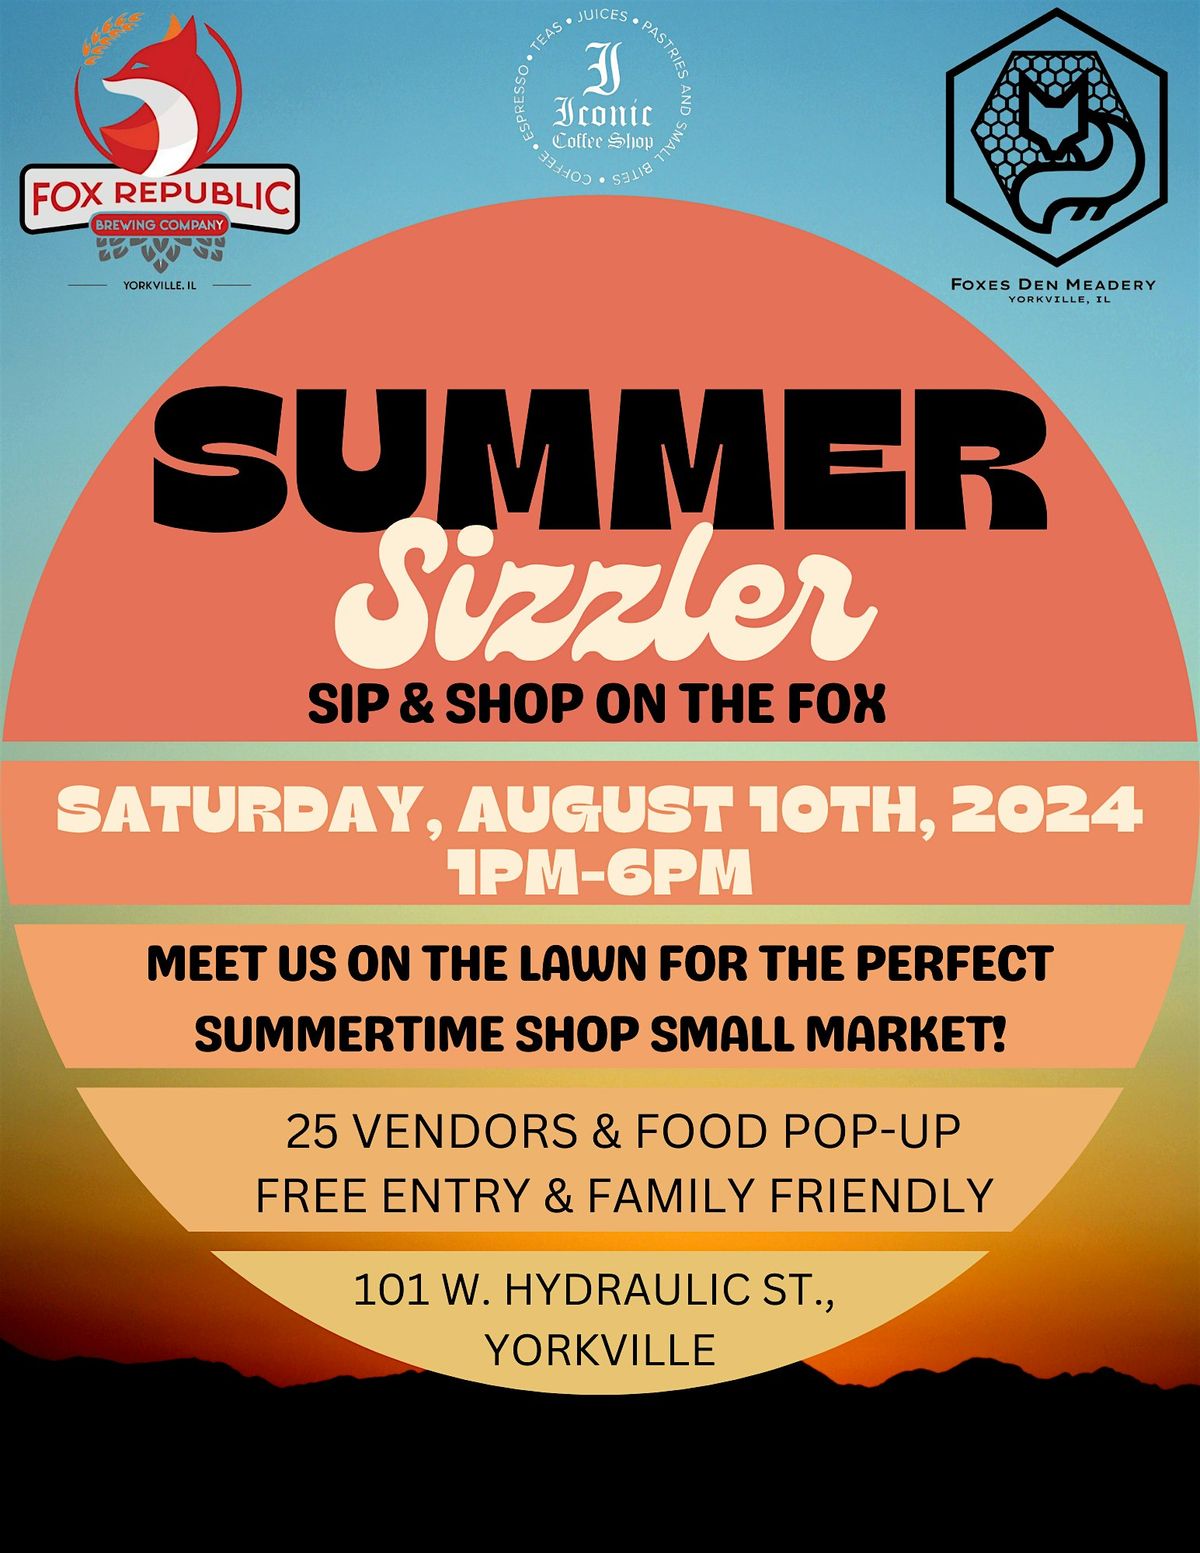 Summer Sizzler Sip & Shop On The Fox